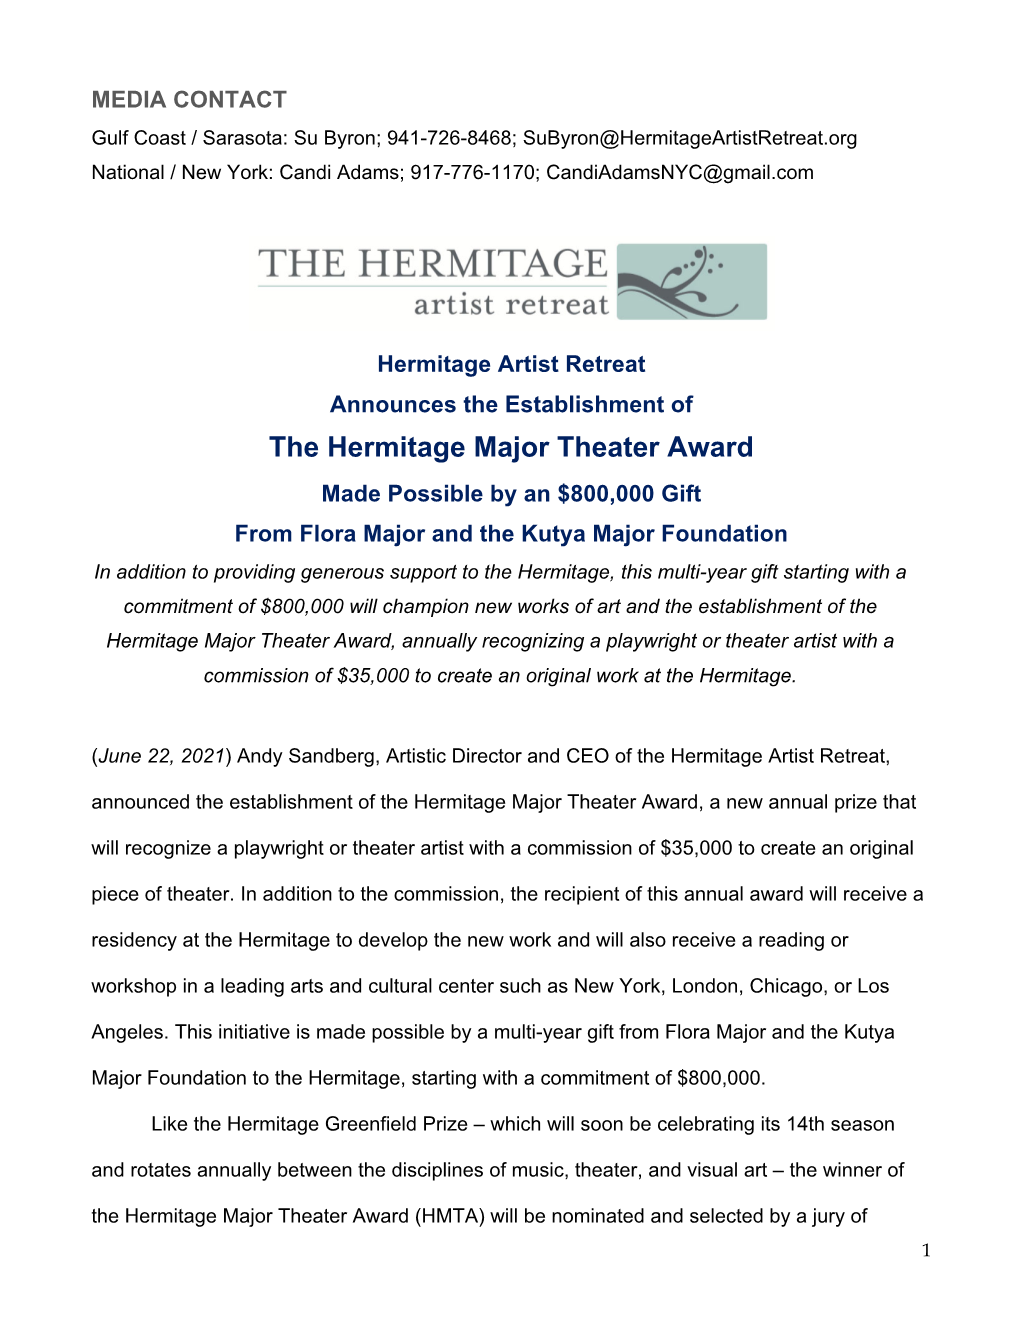 The Hermitage Major Theater Award Made Possible by an $800,000 Gift